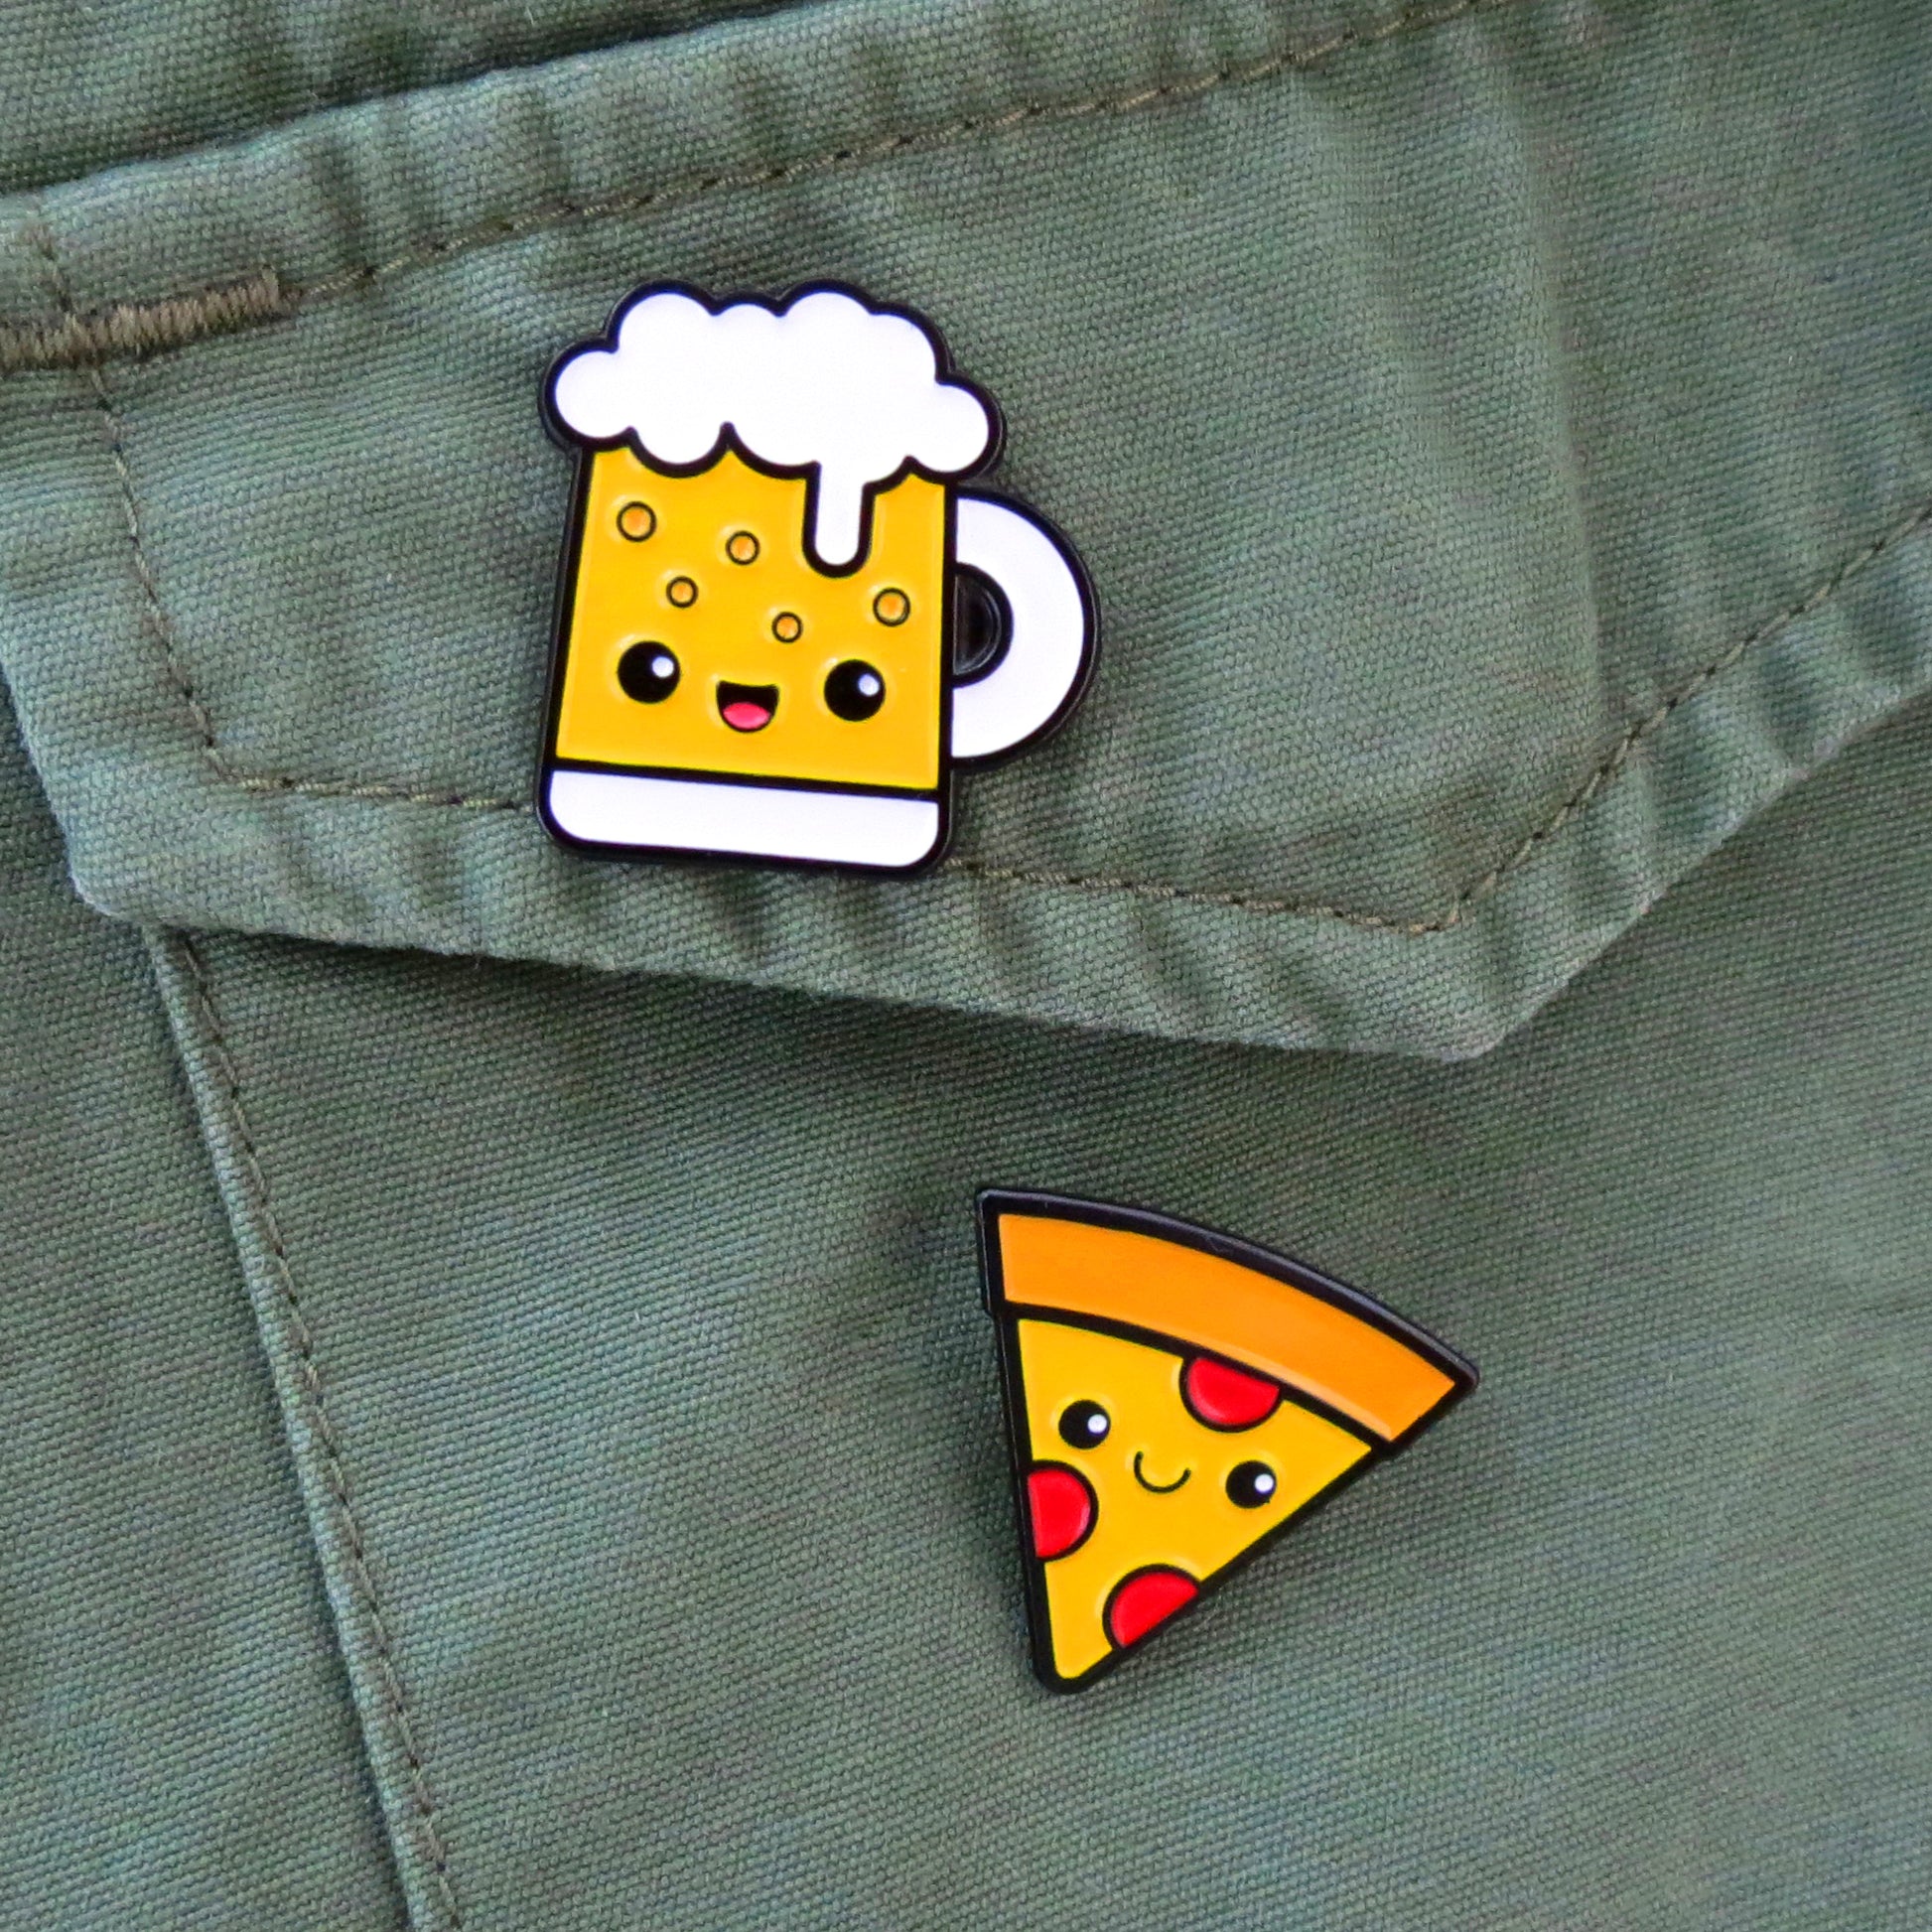 Pizza and Beer enamel pins on olive green canvas jacket pocket